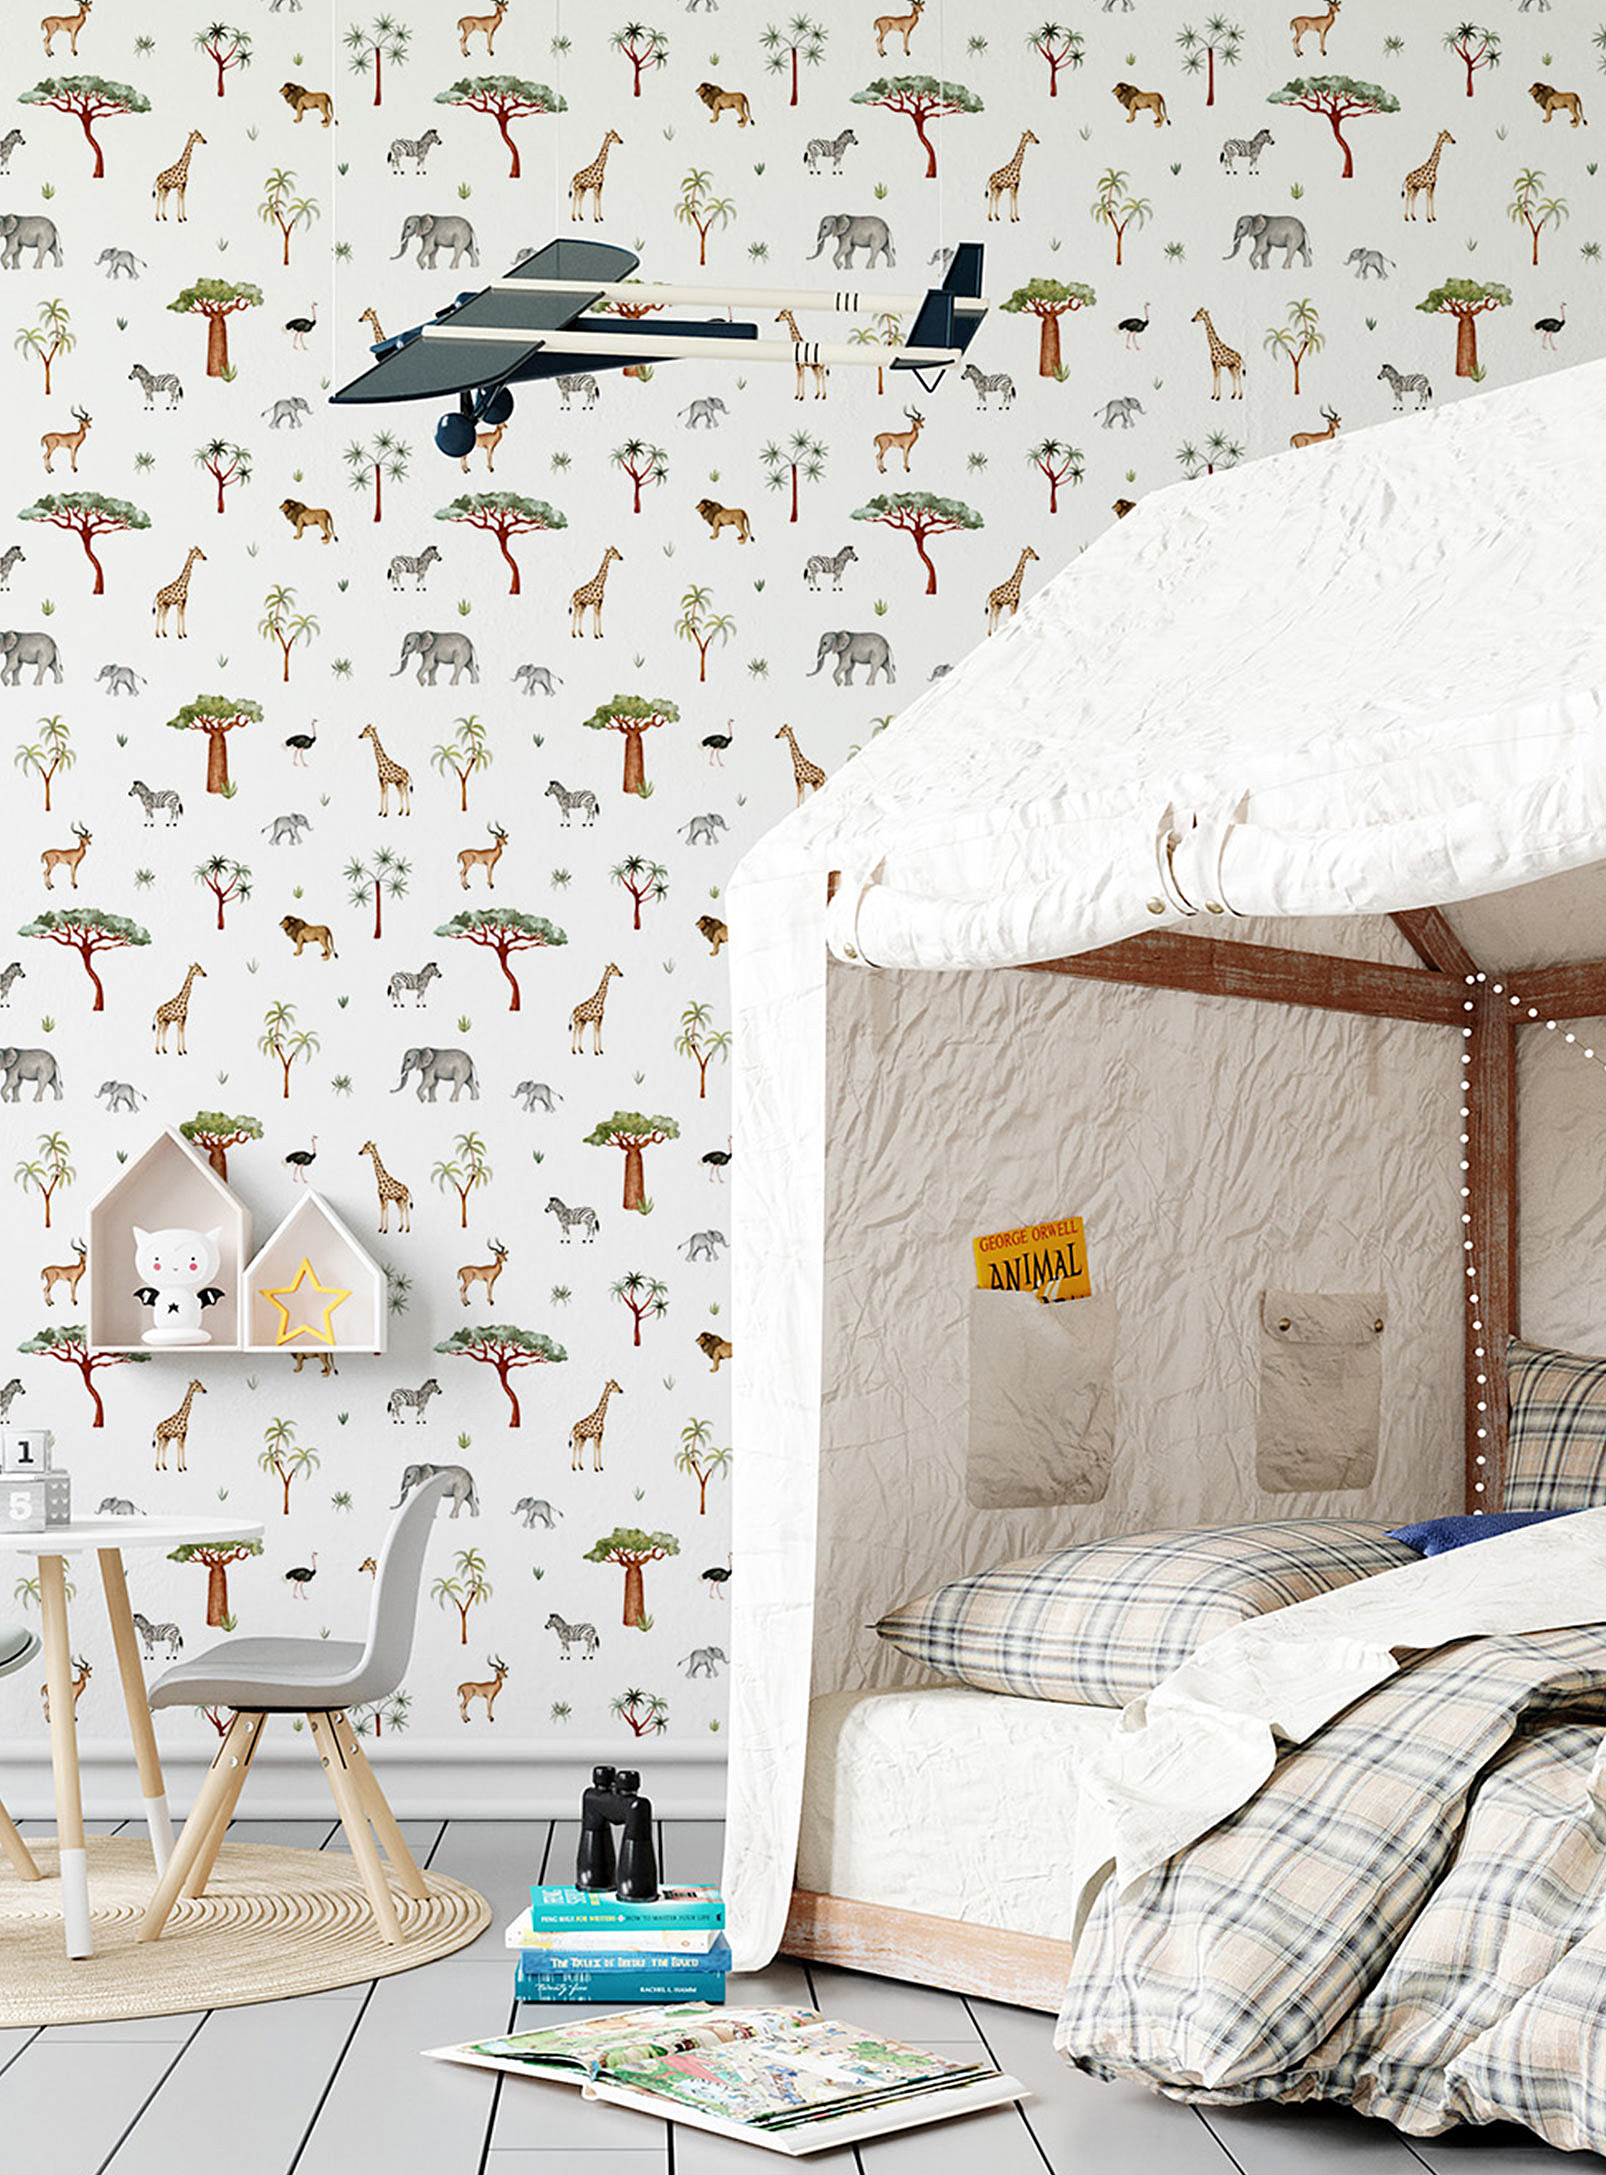 Meraki Savannah Self-adhesive Wallpaper Strip In Collaboration With Artist Marie-lise Leclerc In Patterned White